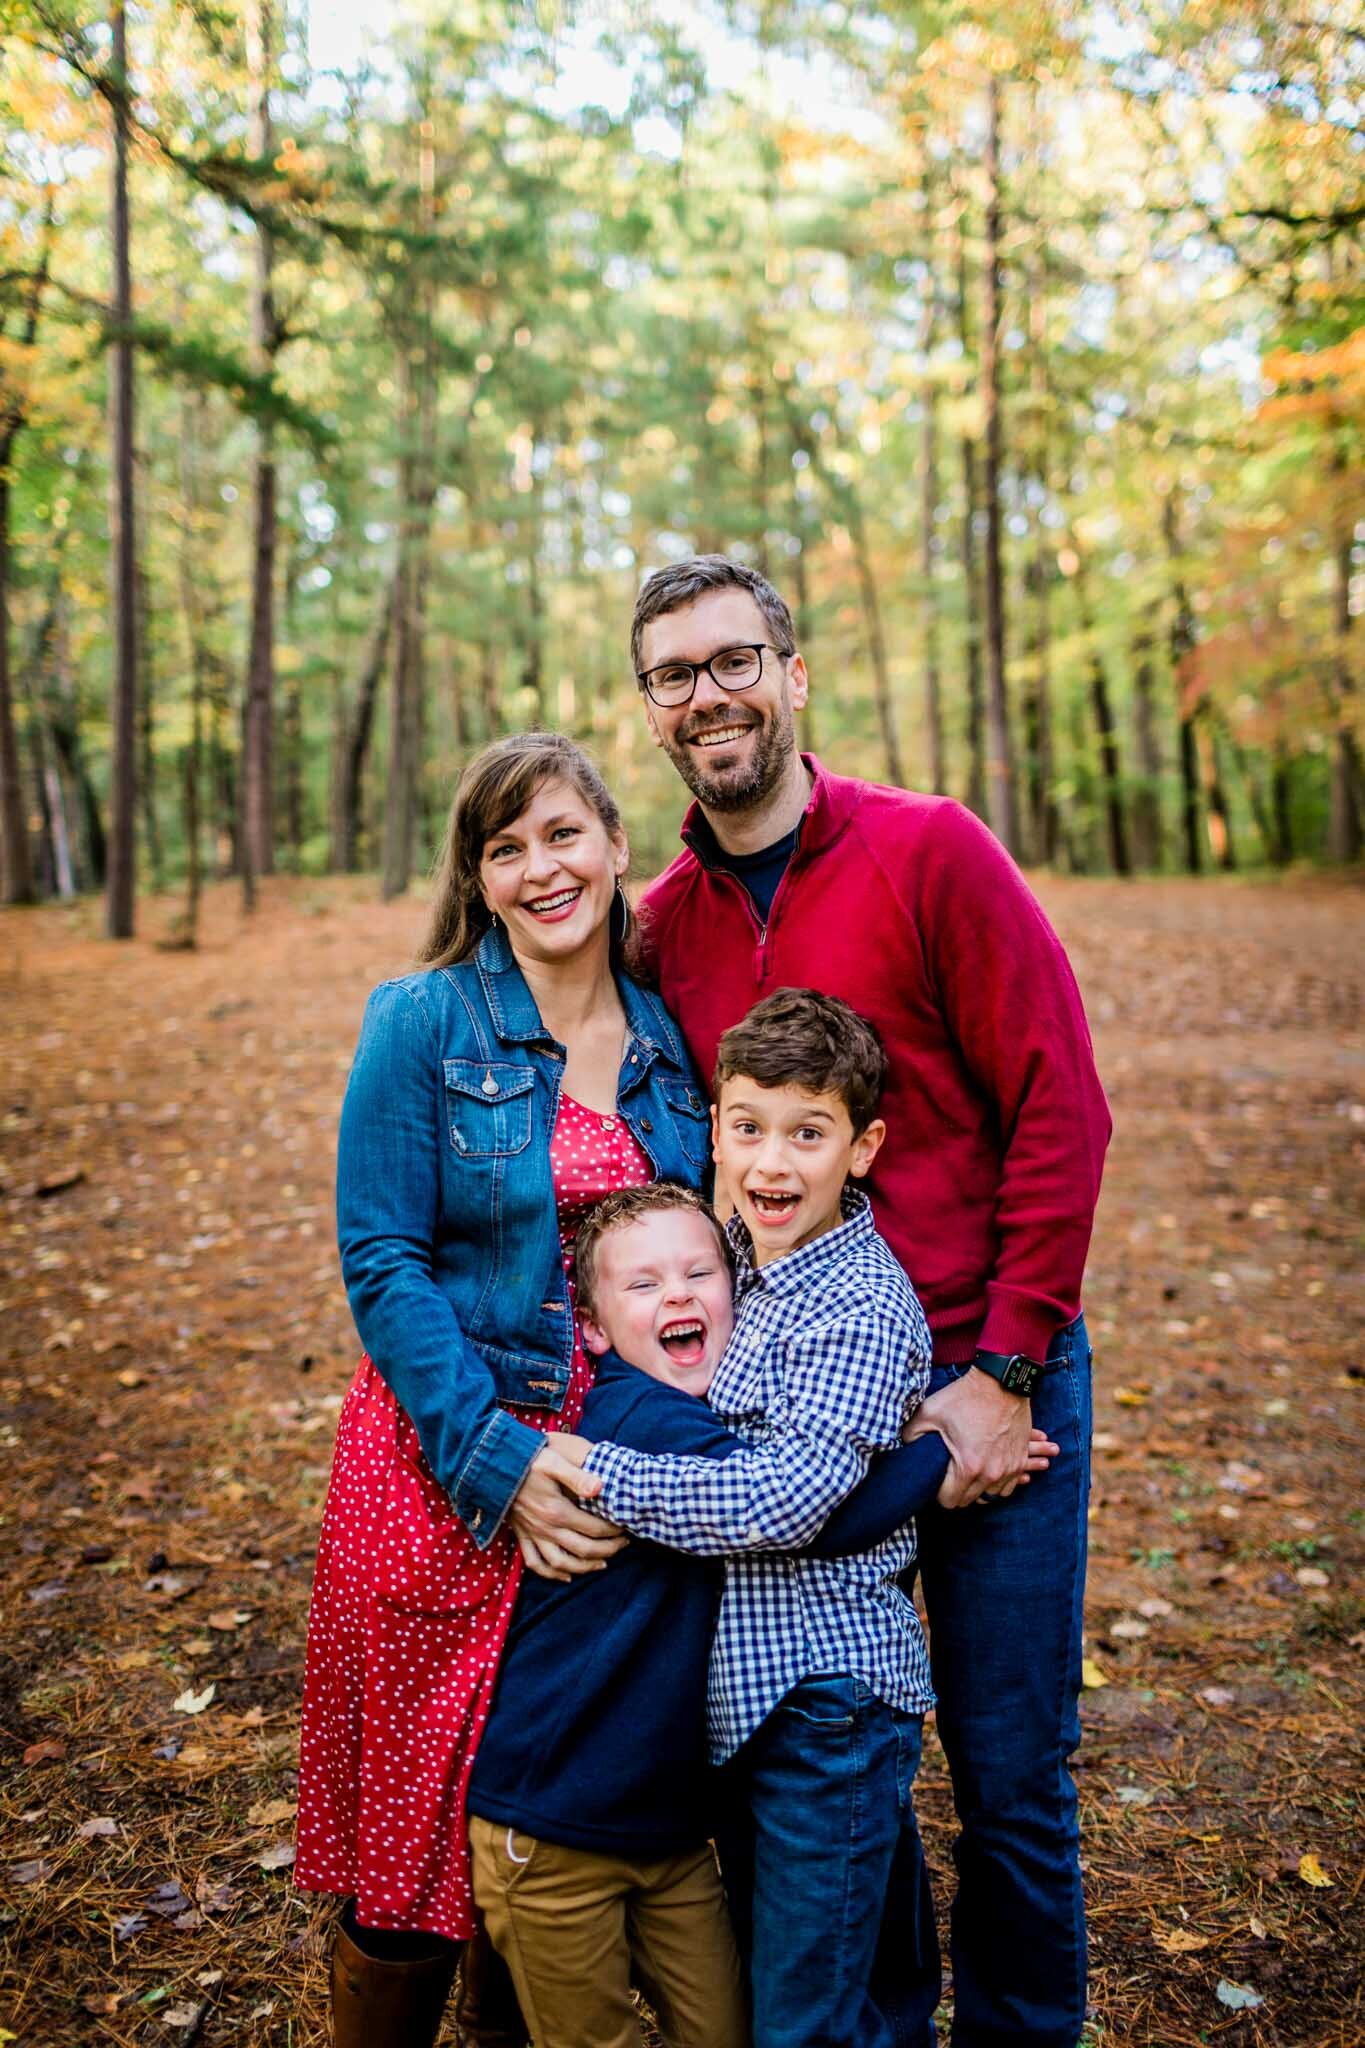 Raleigh Family Photographer | By G. Lin Photography | Umstead Park | Fall family portrait outdoors wearing red and navy